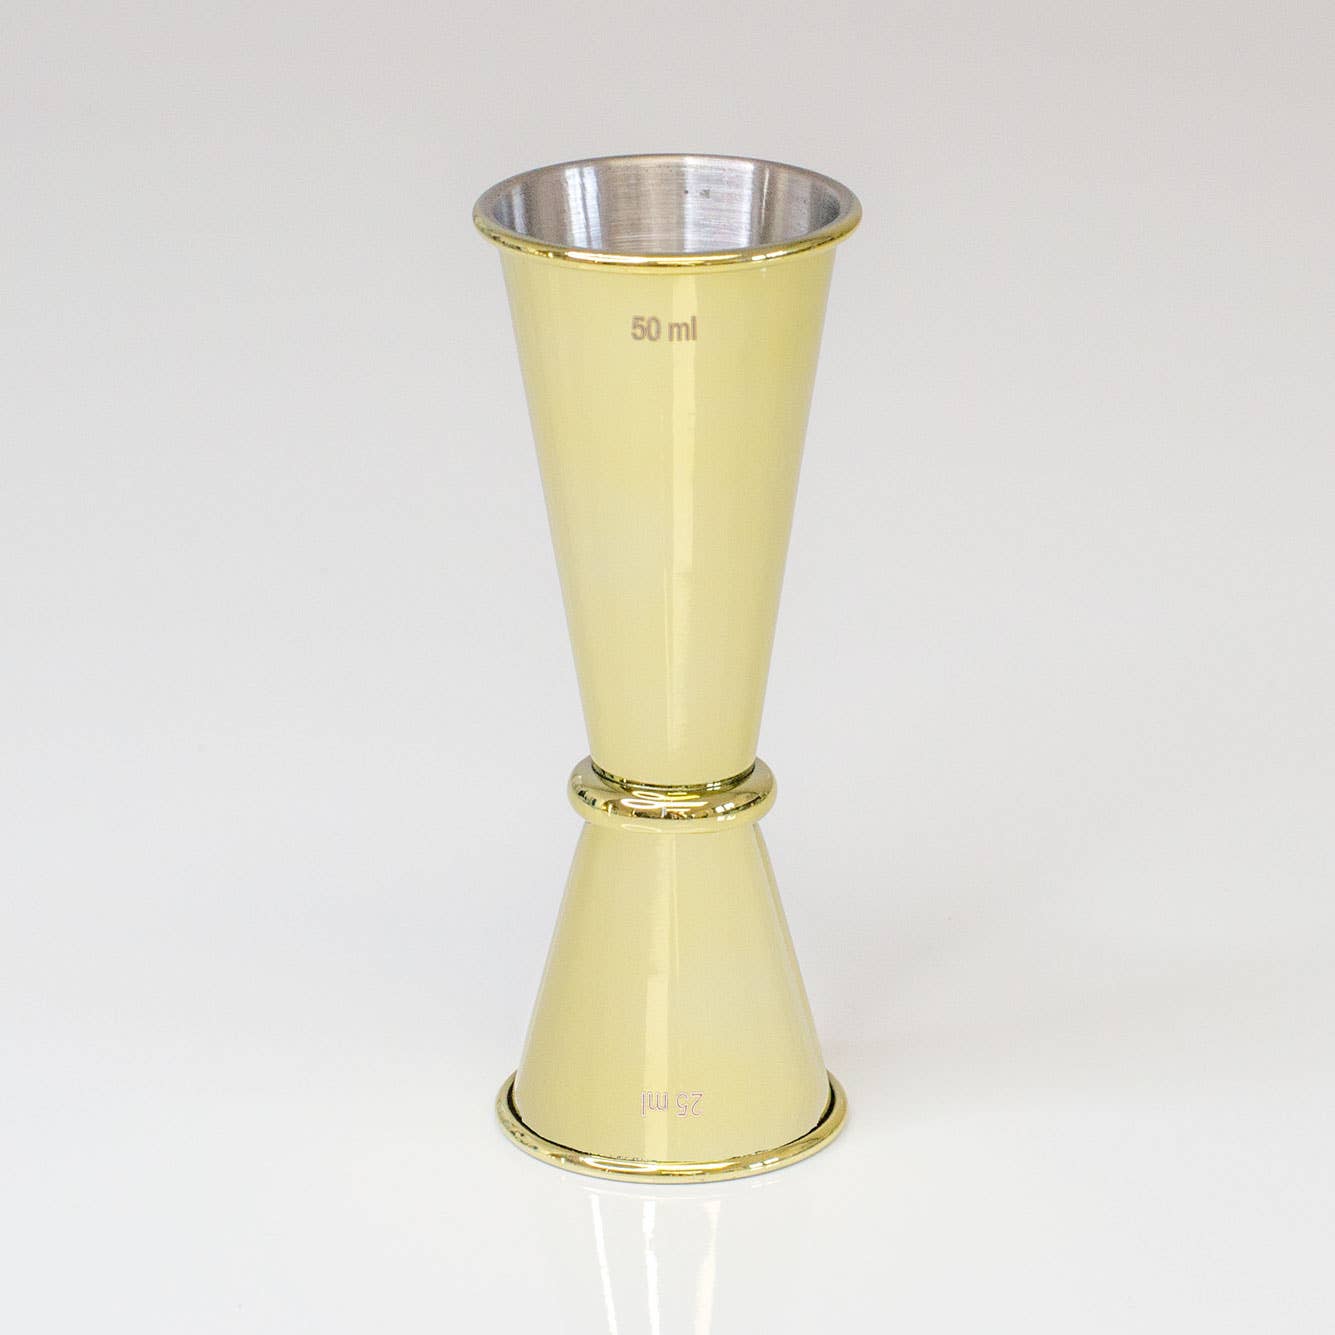 Single and double measure gold coloured cocktail jigger by Uberstar